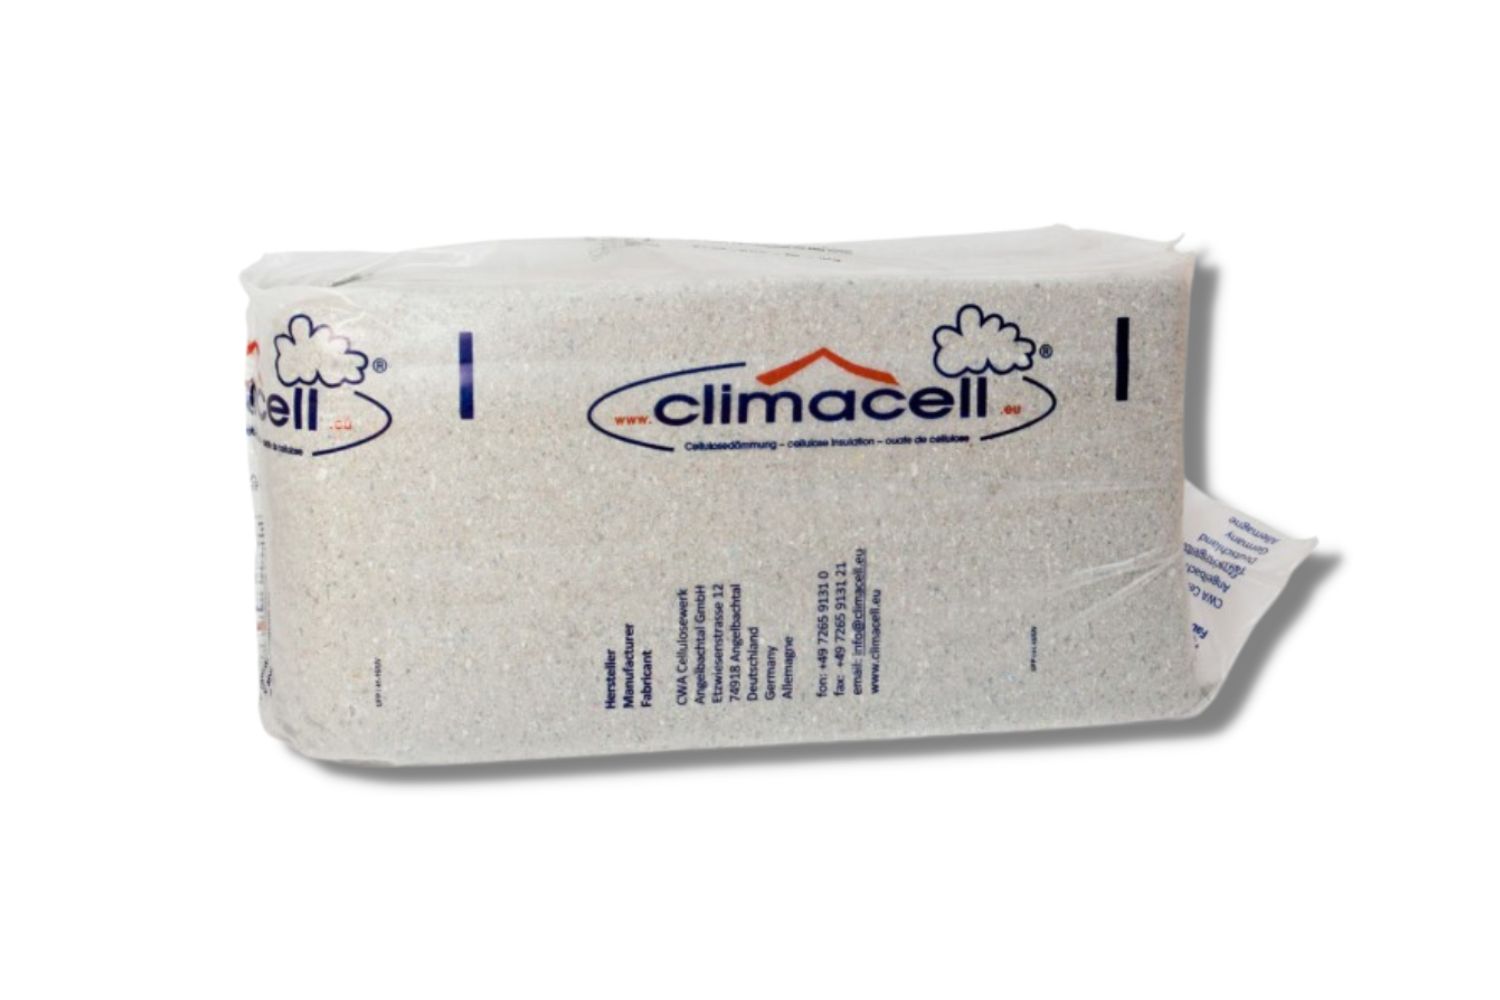 Climacell "S" Zellulose Sackware